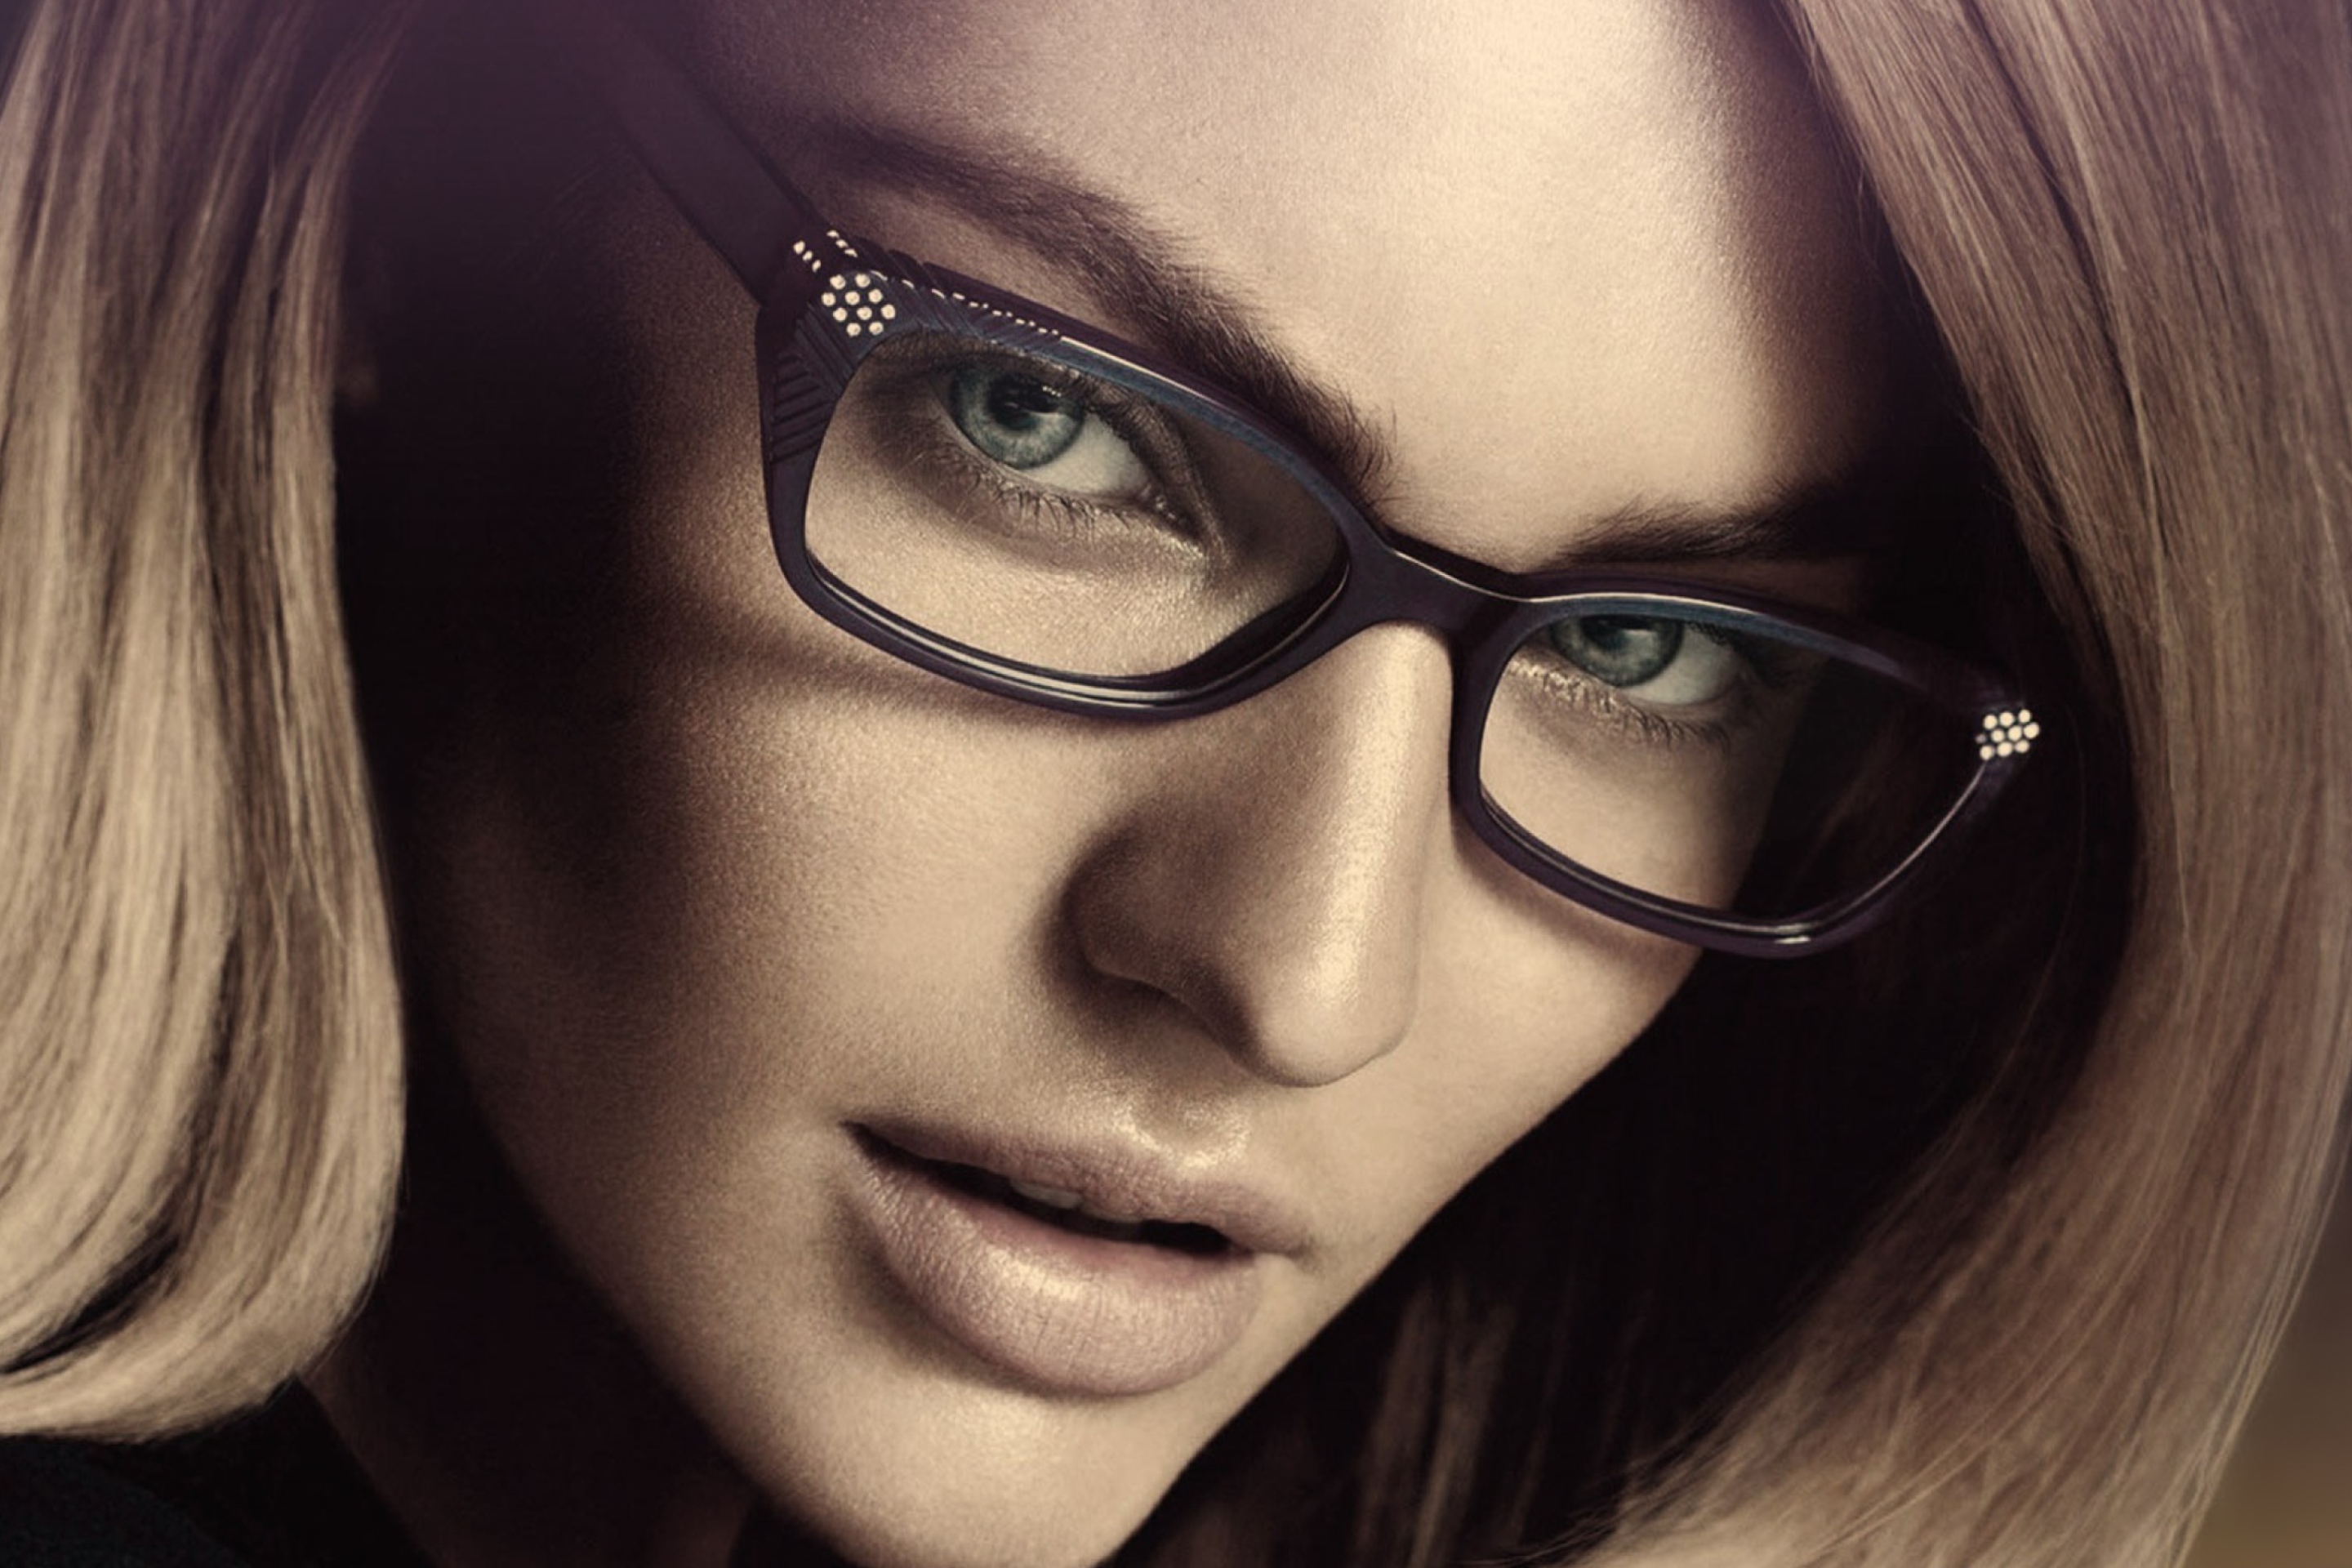 Candice Swanepoel In Glasses wallpaper 2880x1920